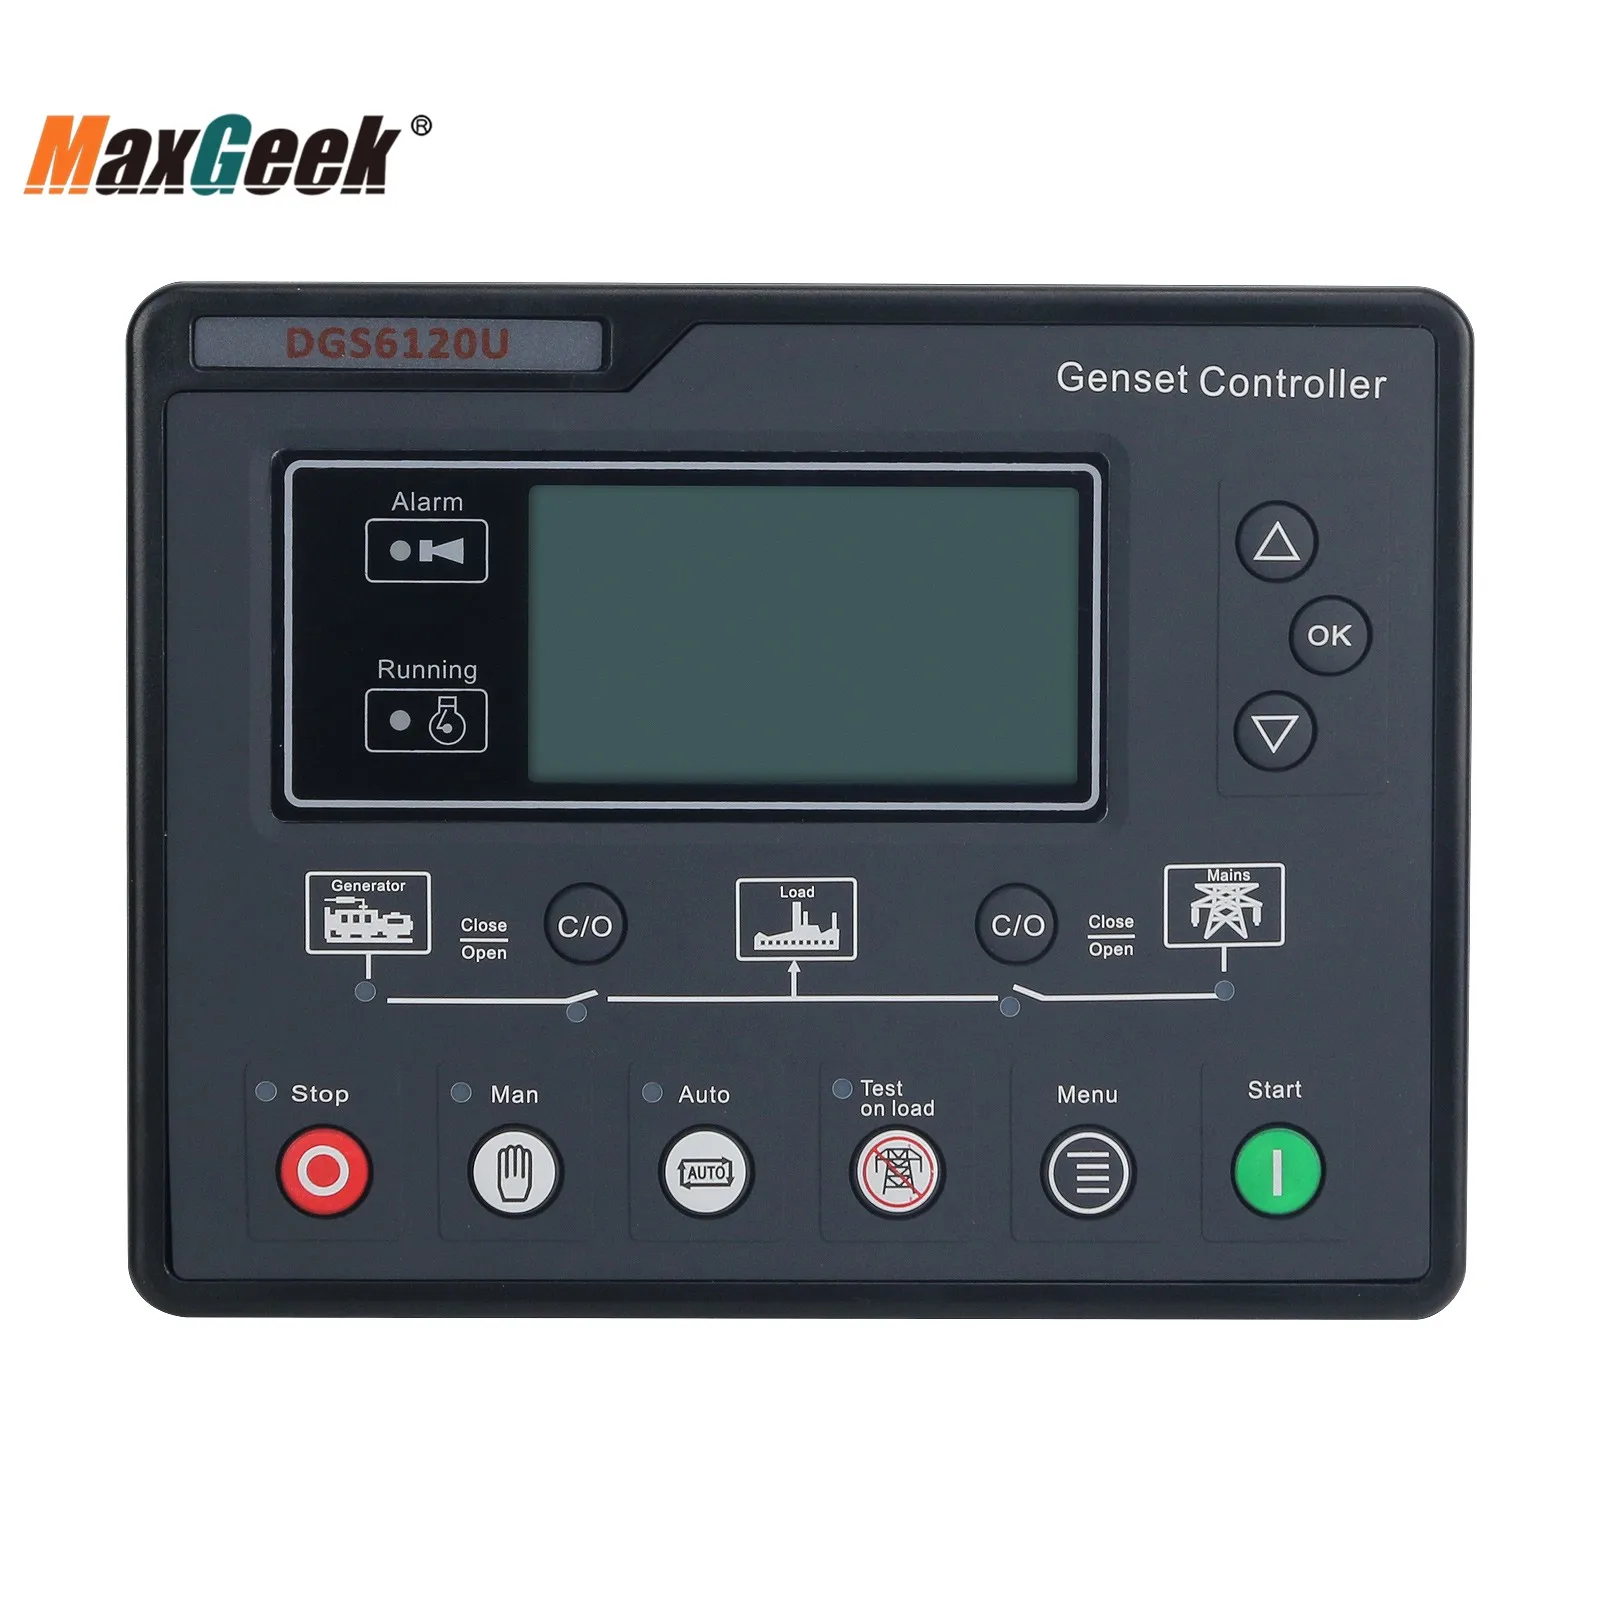 

Maxgeek HGM6120U Diesel Genset Controller Generator Control LCD Module Automatic Start and Stop